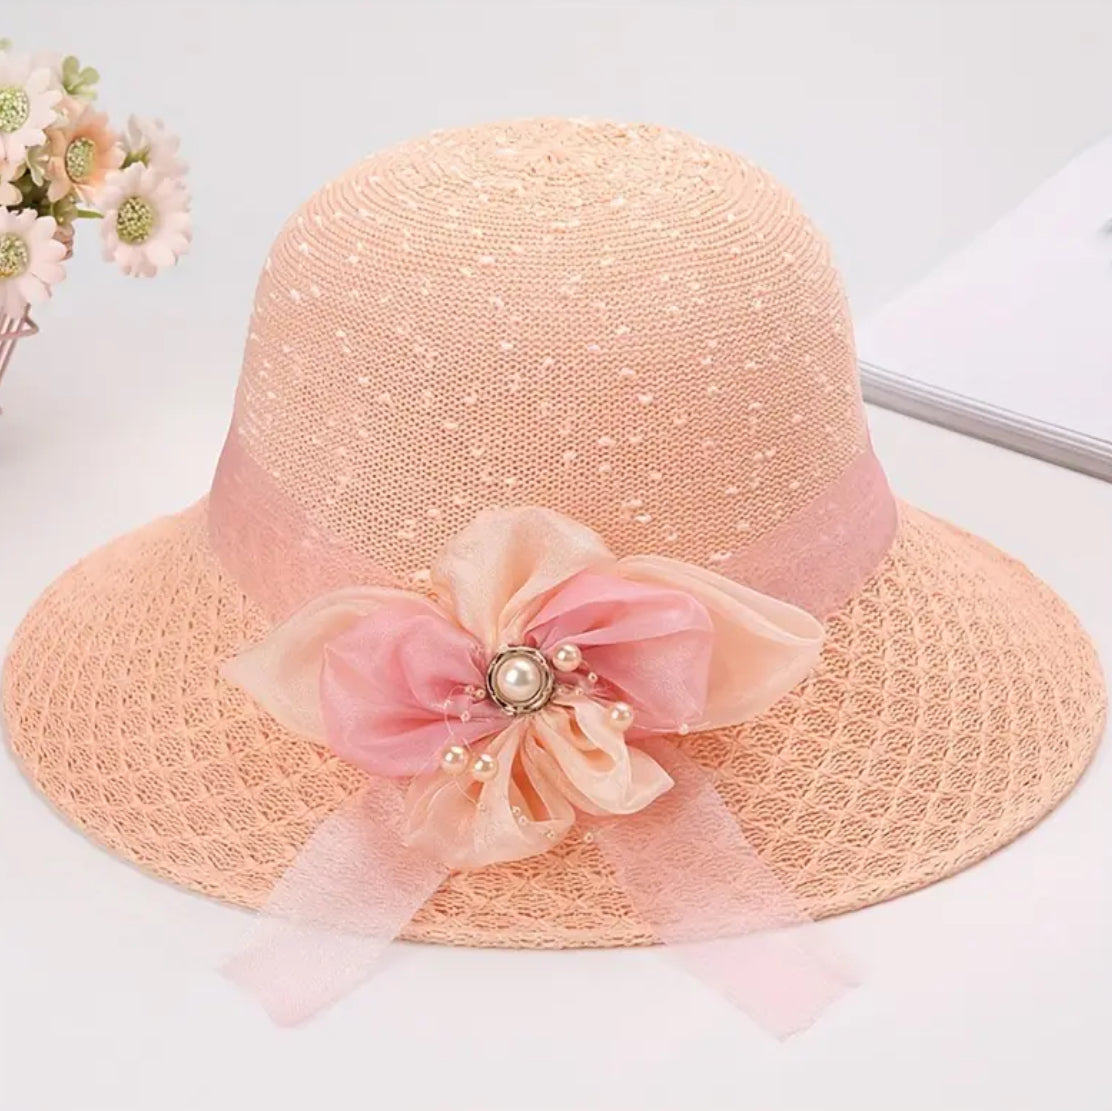 Bows & Pearls Derby Glam, Children’s Sun Protection Straw Hat